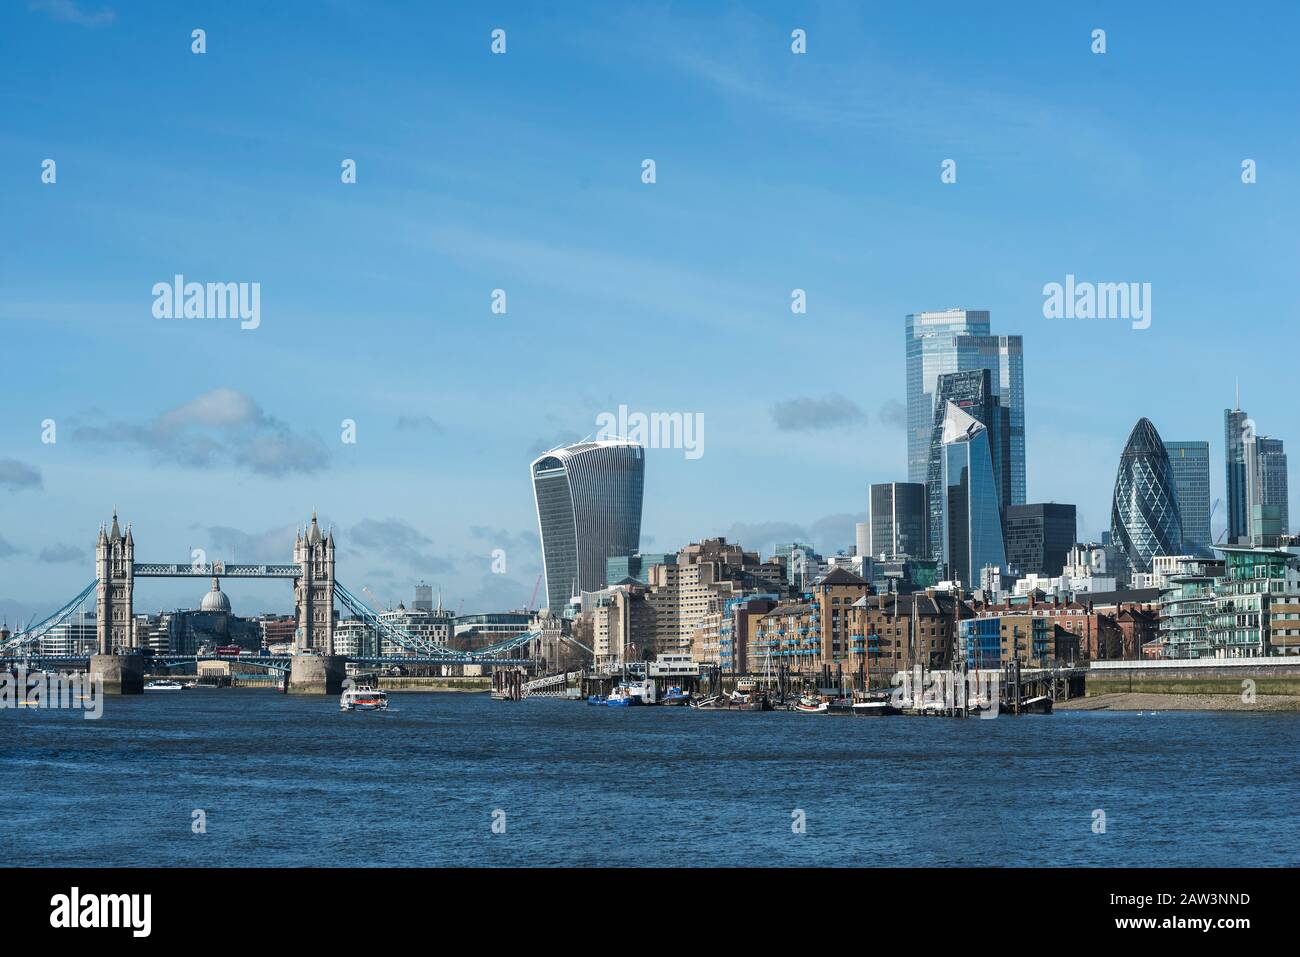 Cityscape of the the financial centre of The City of London from across The River Thames. Stock Photo